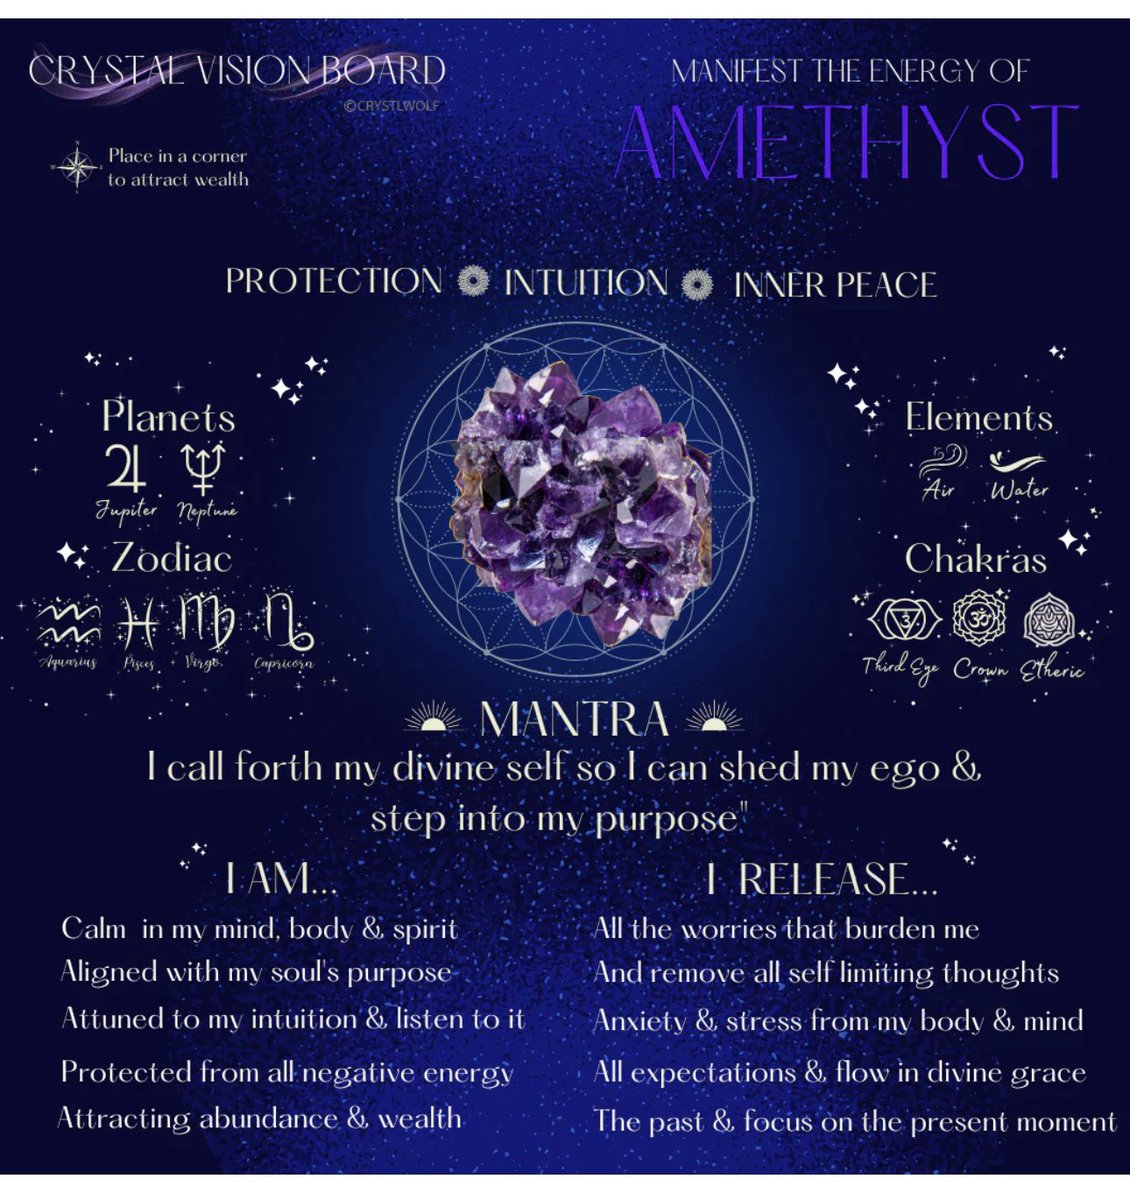 Crystal Vision Board: Amethyst
Use as a guide to learn & connect with the healing energy of Amethyst!

#crystals #crystalhealing #crystalshop #healinggems #selfcare #crystalknowledge